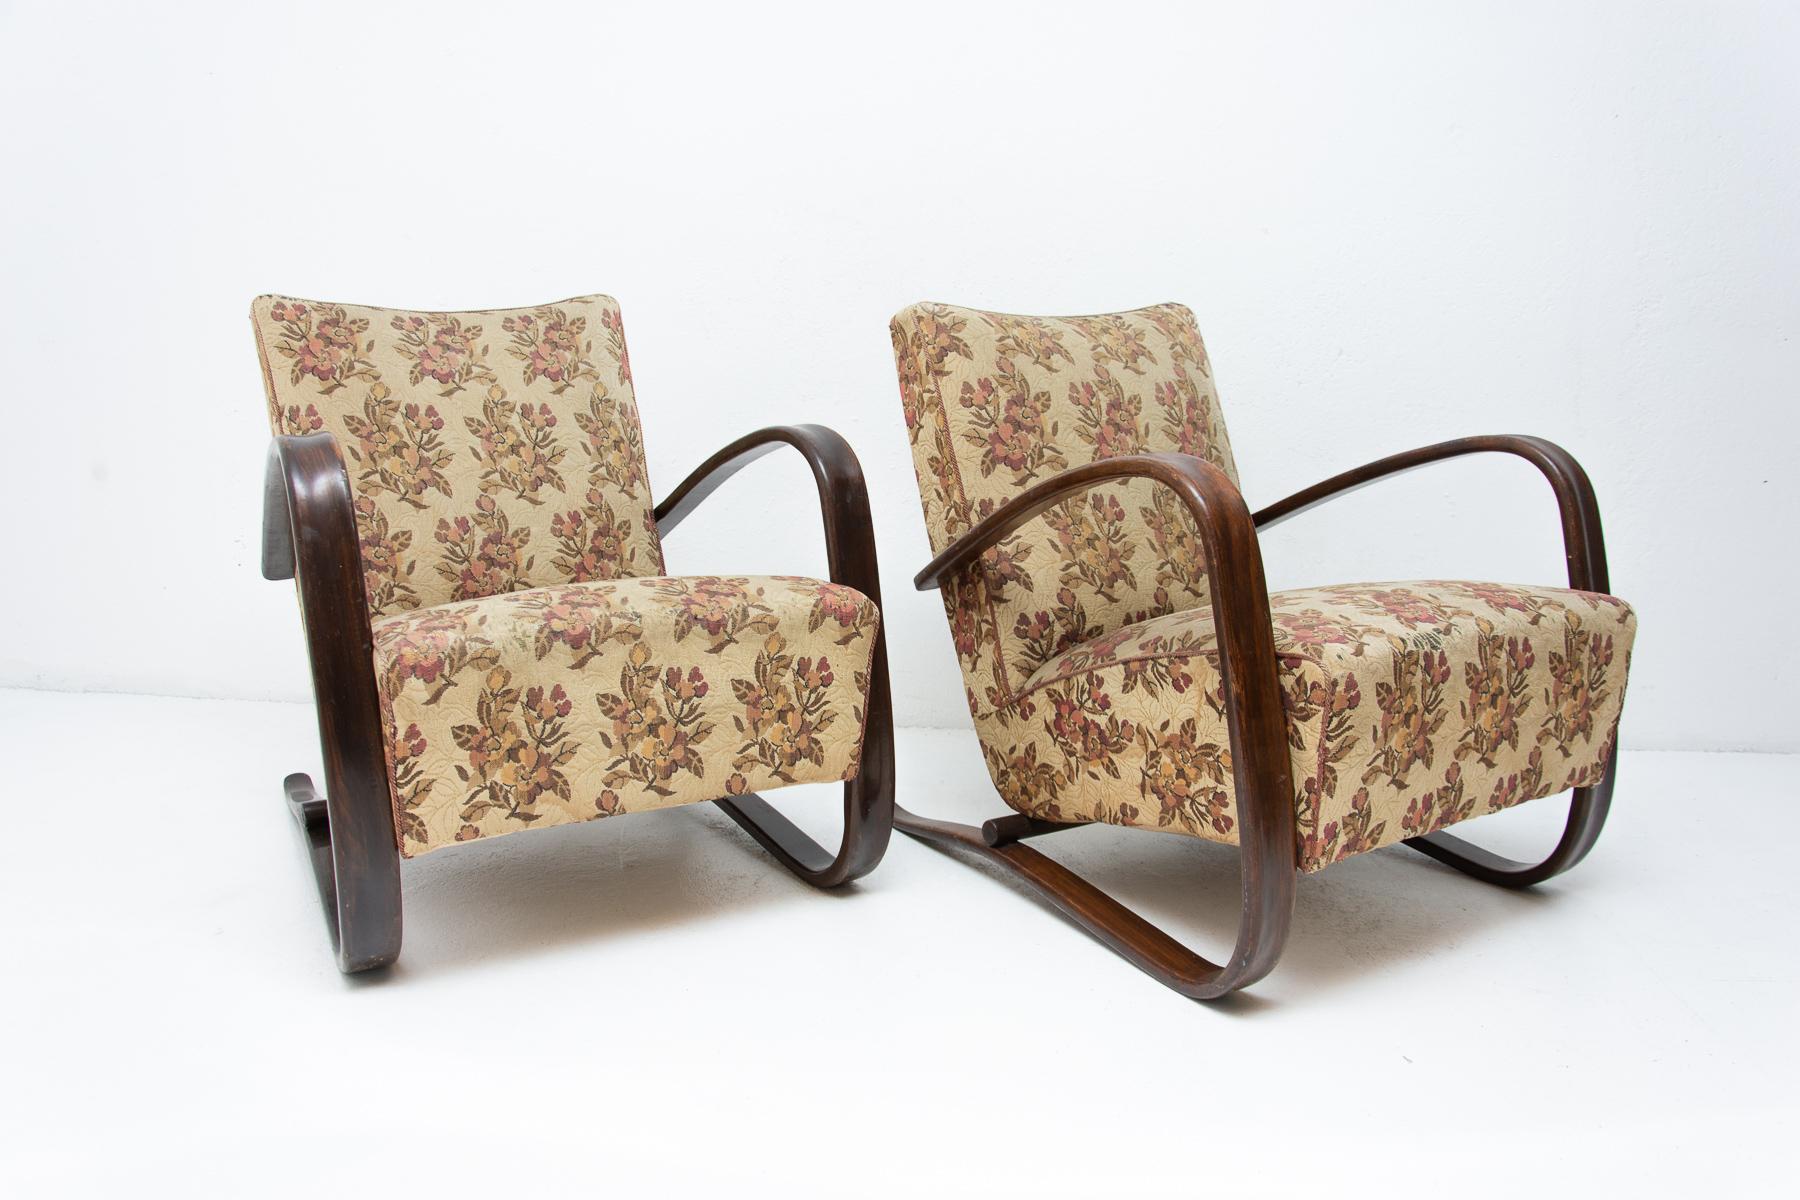 A pair of famous Art Deco ebonized bentwood armchairs by Jindrich Halabala, model H-269 from the 1930s. These armchairs were made in the 1940s. They feature an original upholstery, the wooden armrests are in very good Vintage condition without